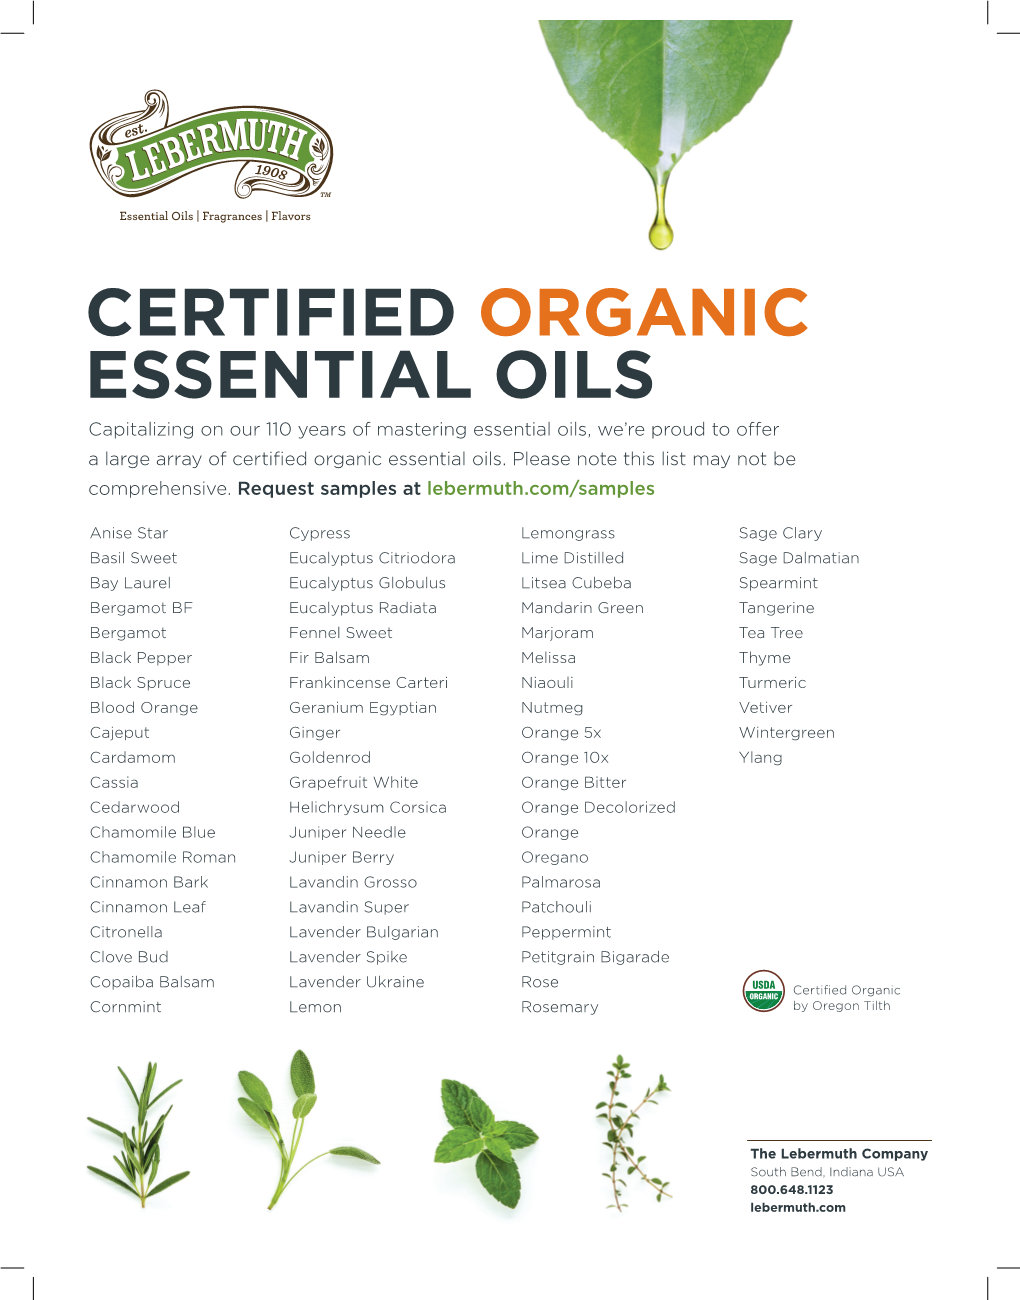 CERTIFIED ORGANIC ESSENTIAL OILS Capitalizing on Our 110 Years of Mastering Essential Oils, We’Re Proud to Offer a Large Array of Certified Organic Essential Oils